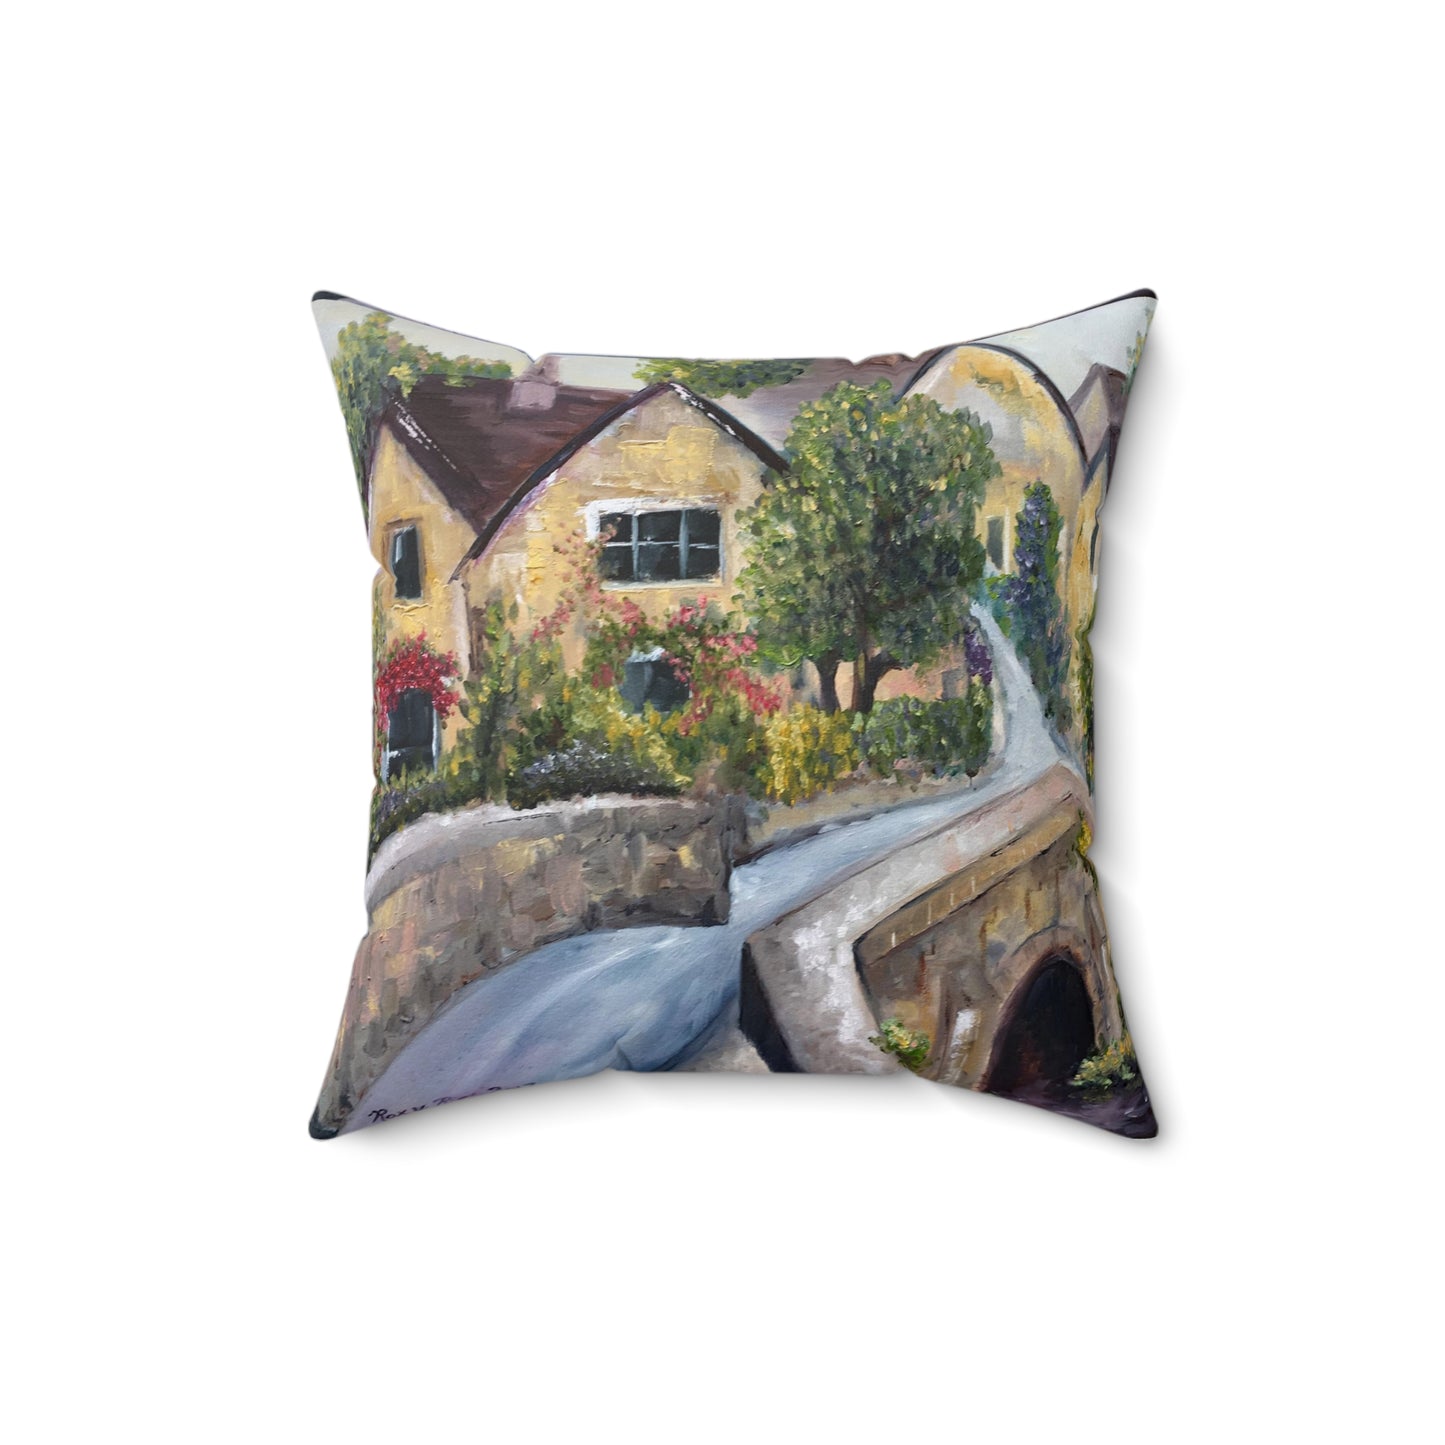 Castle Combe Cotswolds  Indoor Spun Polyester Square Pillow